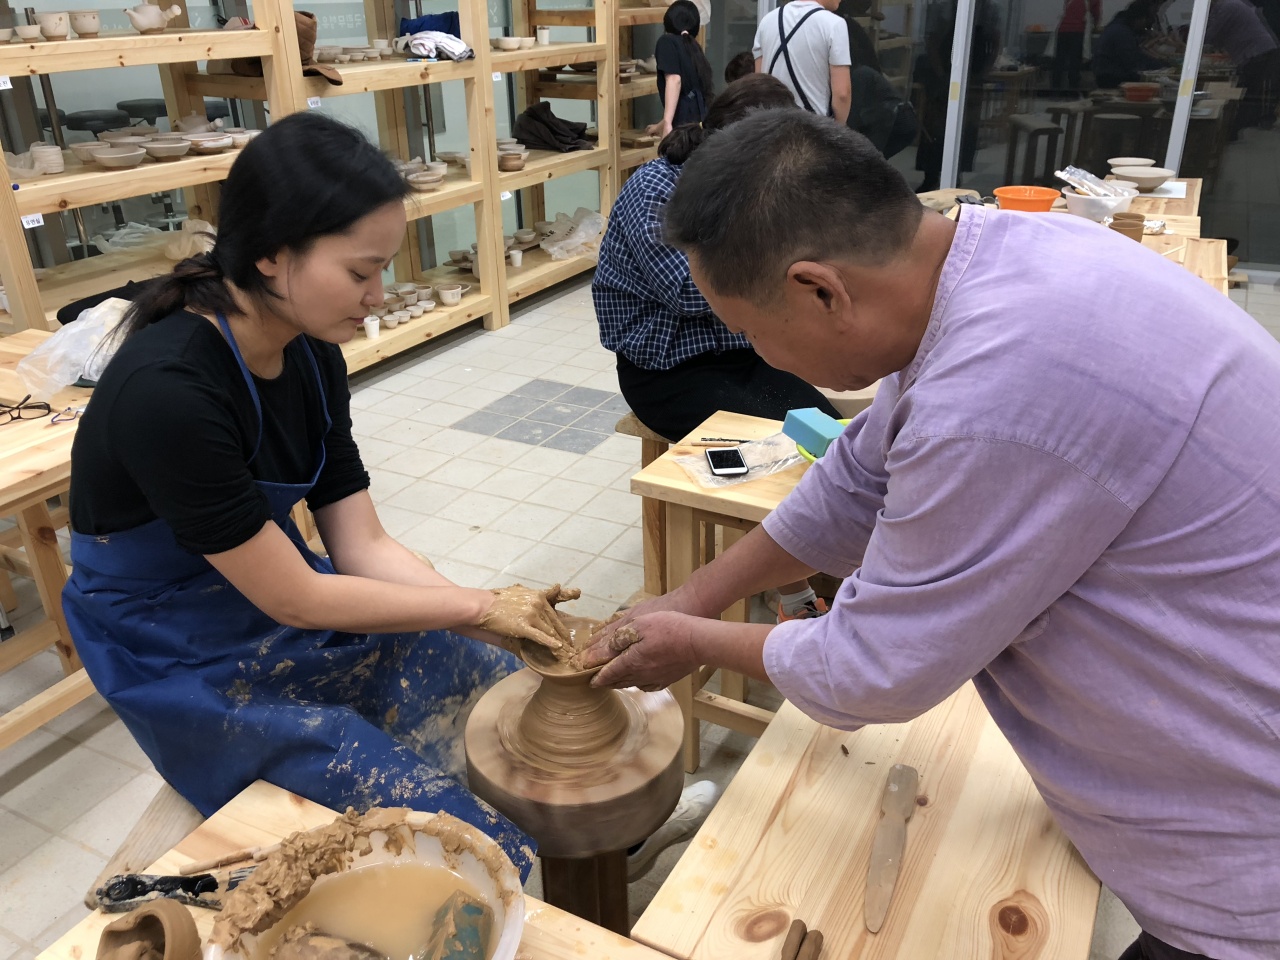 A visitor learns Korean pottery making led by a professional instructor during an NIHC workshop in 2019. (NIHC)